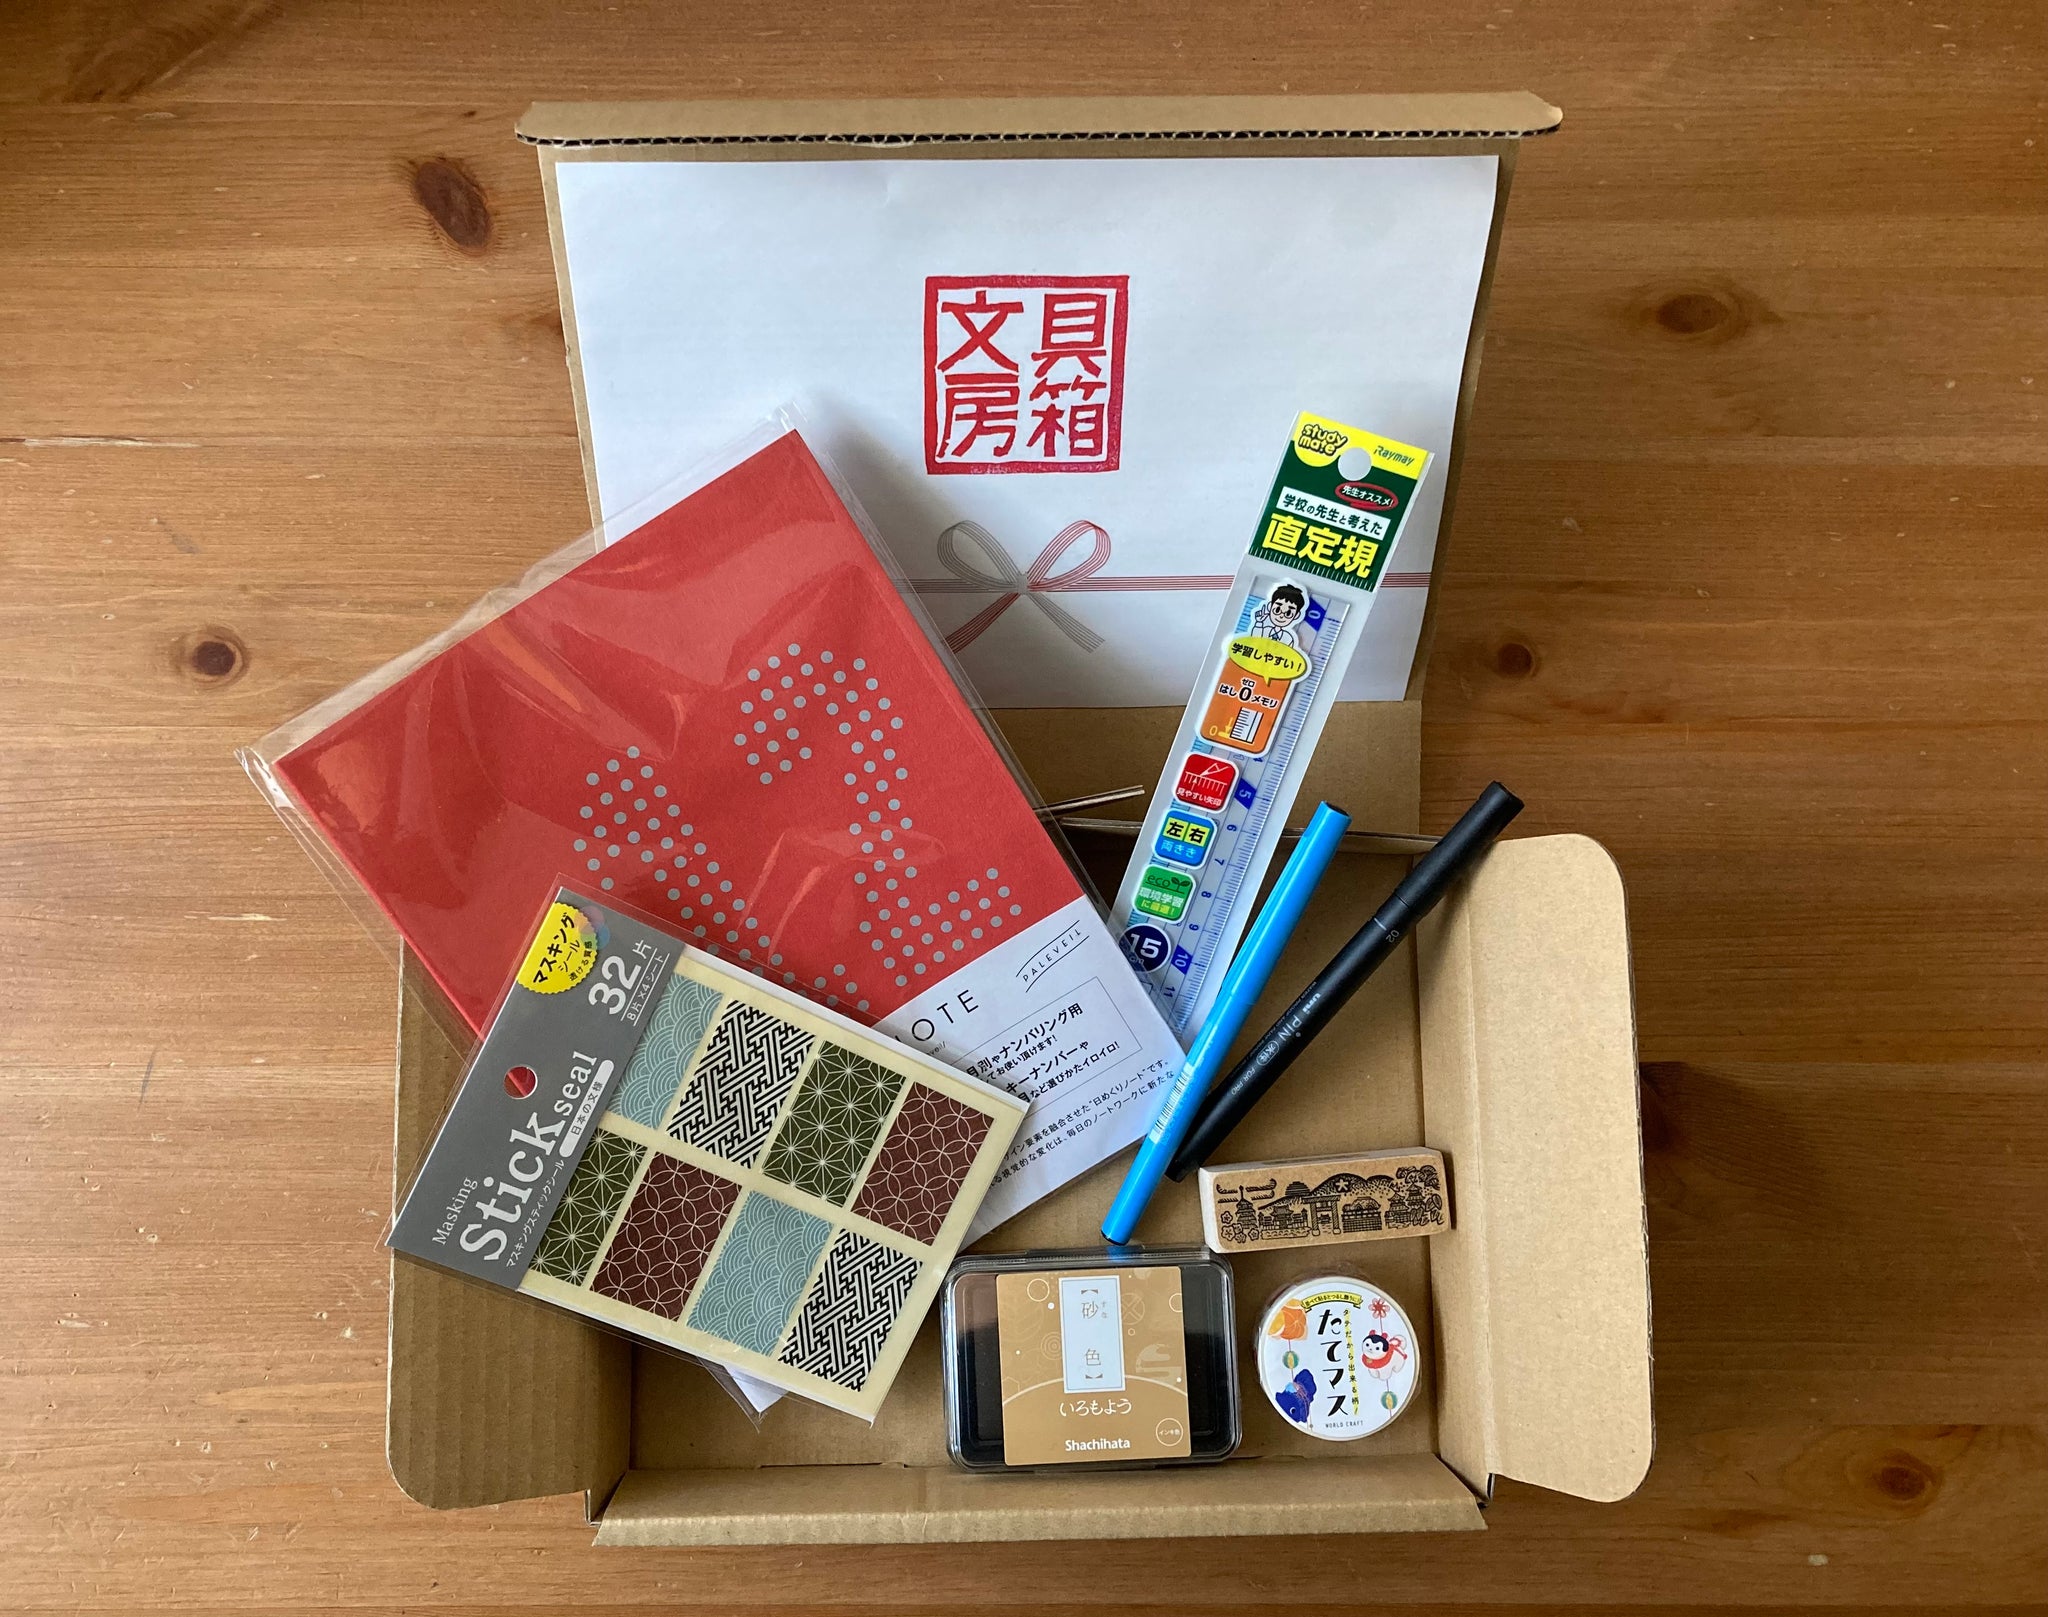 September 2020 Stationery Box *Not Subscription*